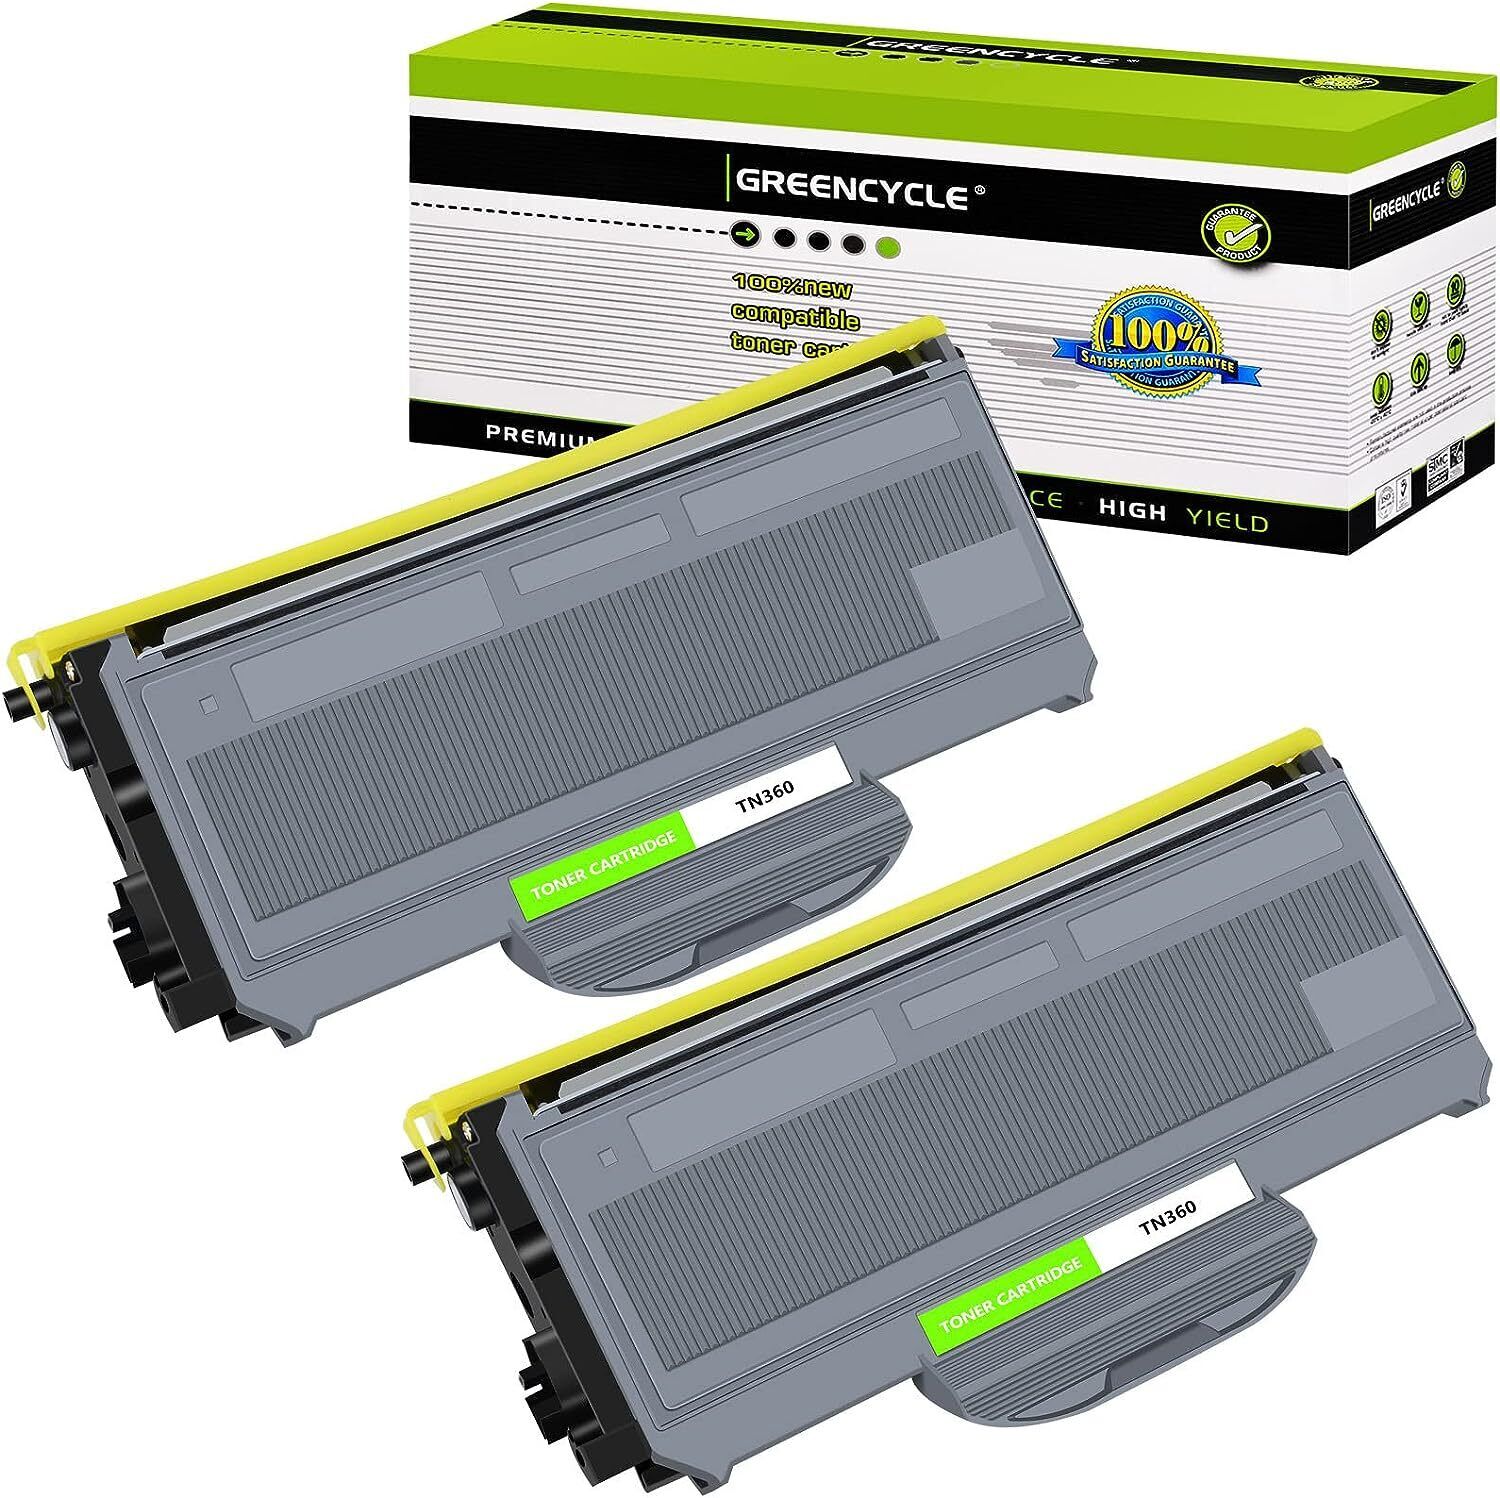 2PK greencycle High Yield Compatible Toner Cartridge for Brother TN360 HL-2140